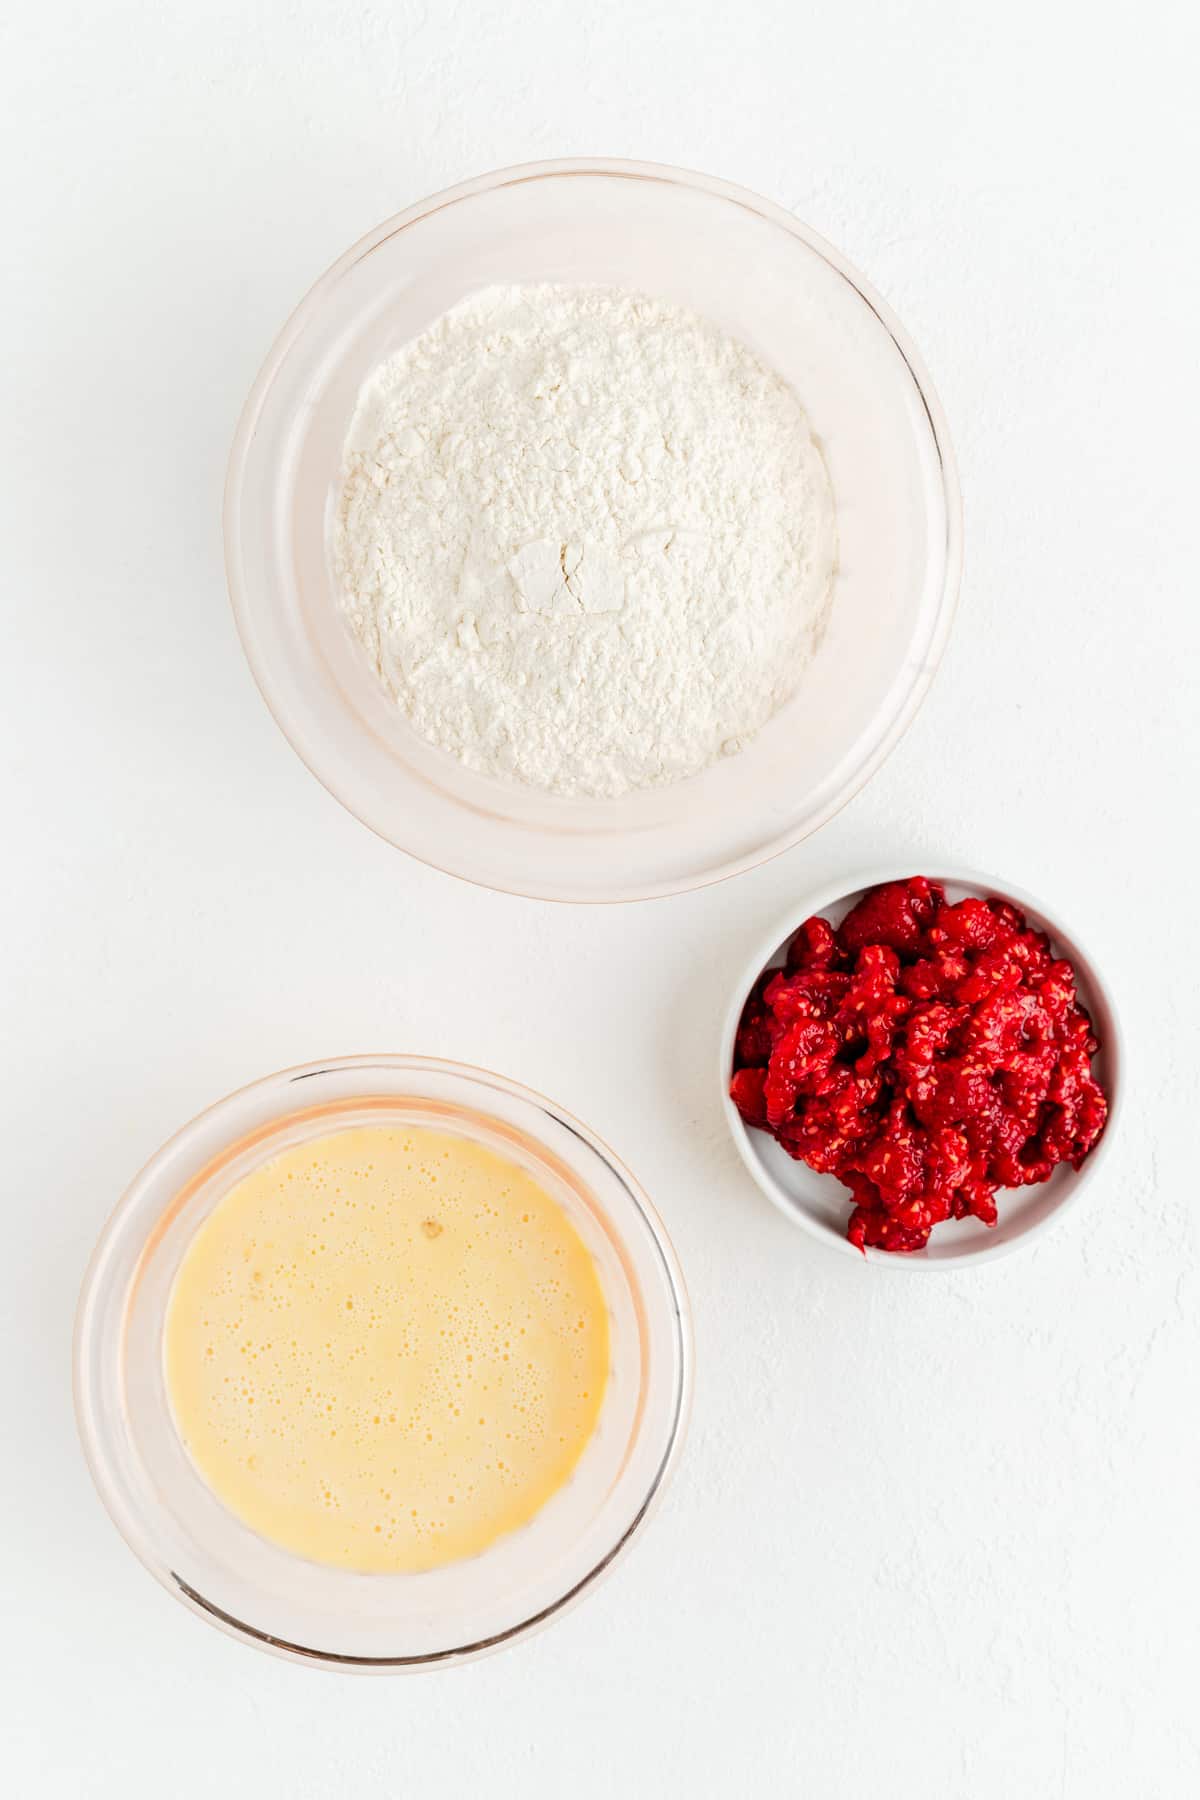 Dry ingredients, wet ingredients, and crushed fresh raspberries in their own bowls on white background.